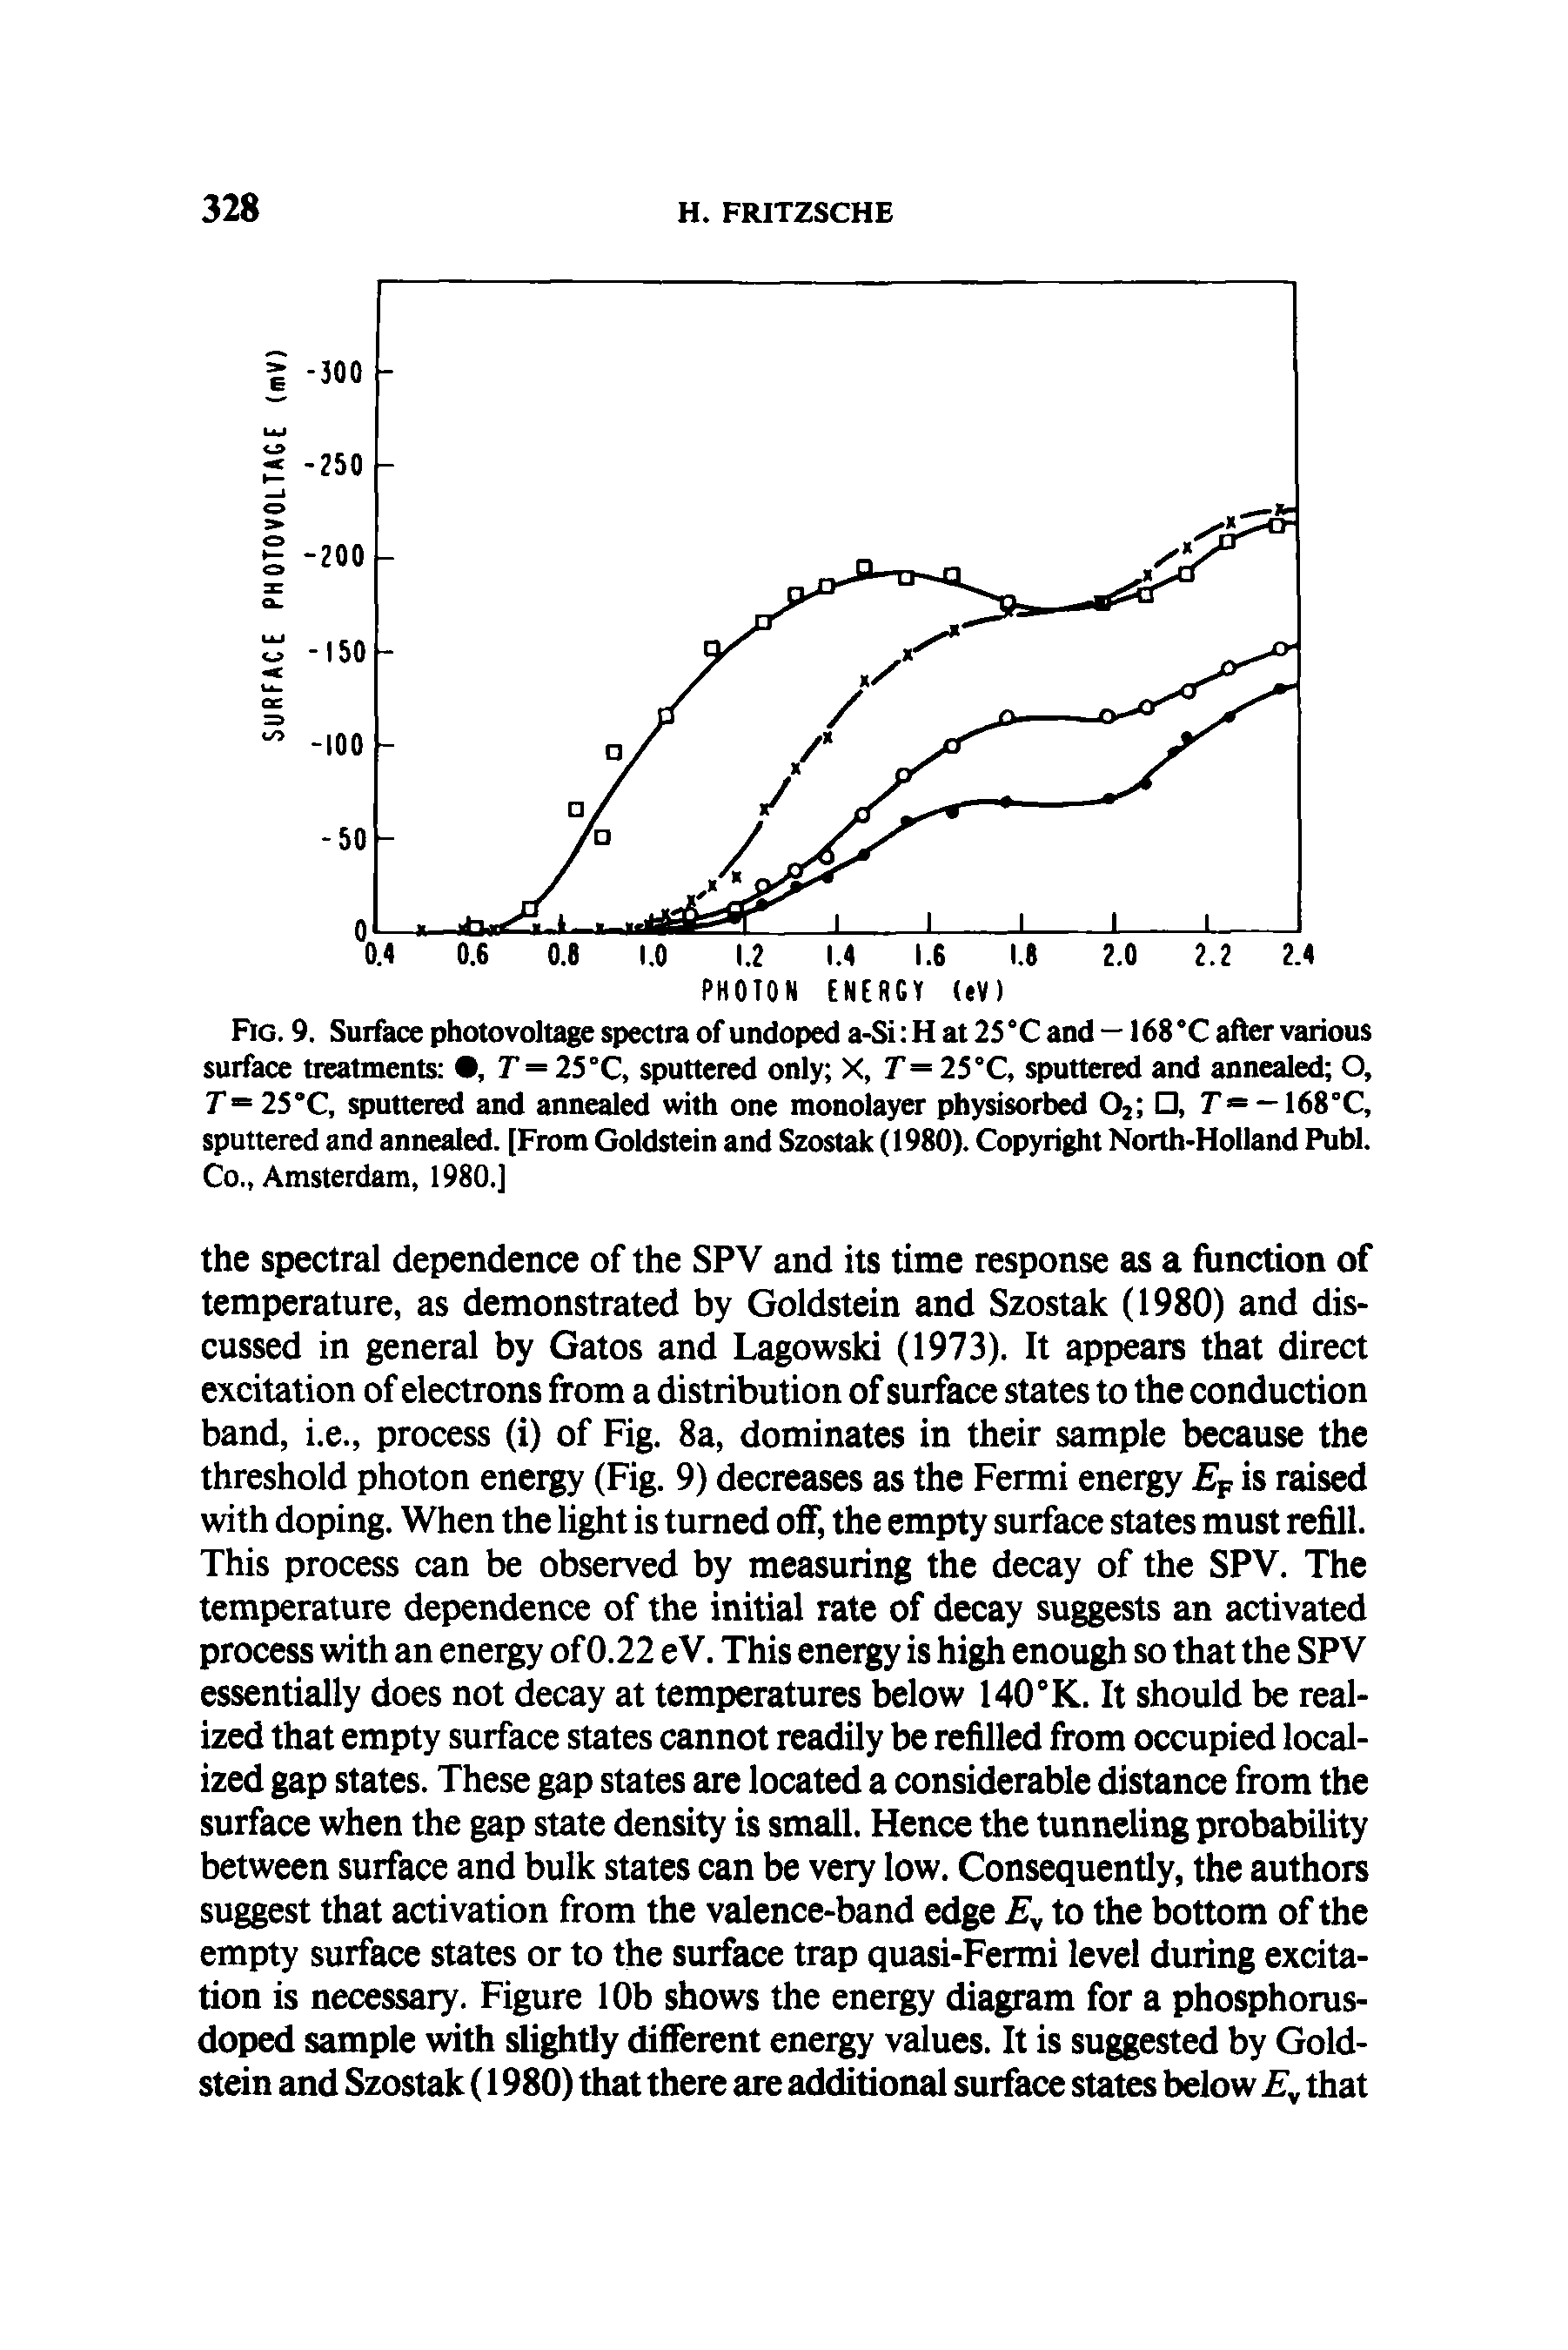 Fig. 9. Surface photovoltage spectra of undoped a-Si H at 25 °C and — 168 °C after various surface treatments 9, T = 25 °C, sputtered only X, T= 25°C, sputtered and annealed O, r= 25 C, sputtered and annealed with one monolayer physisorbed O2 , — 168°C,...